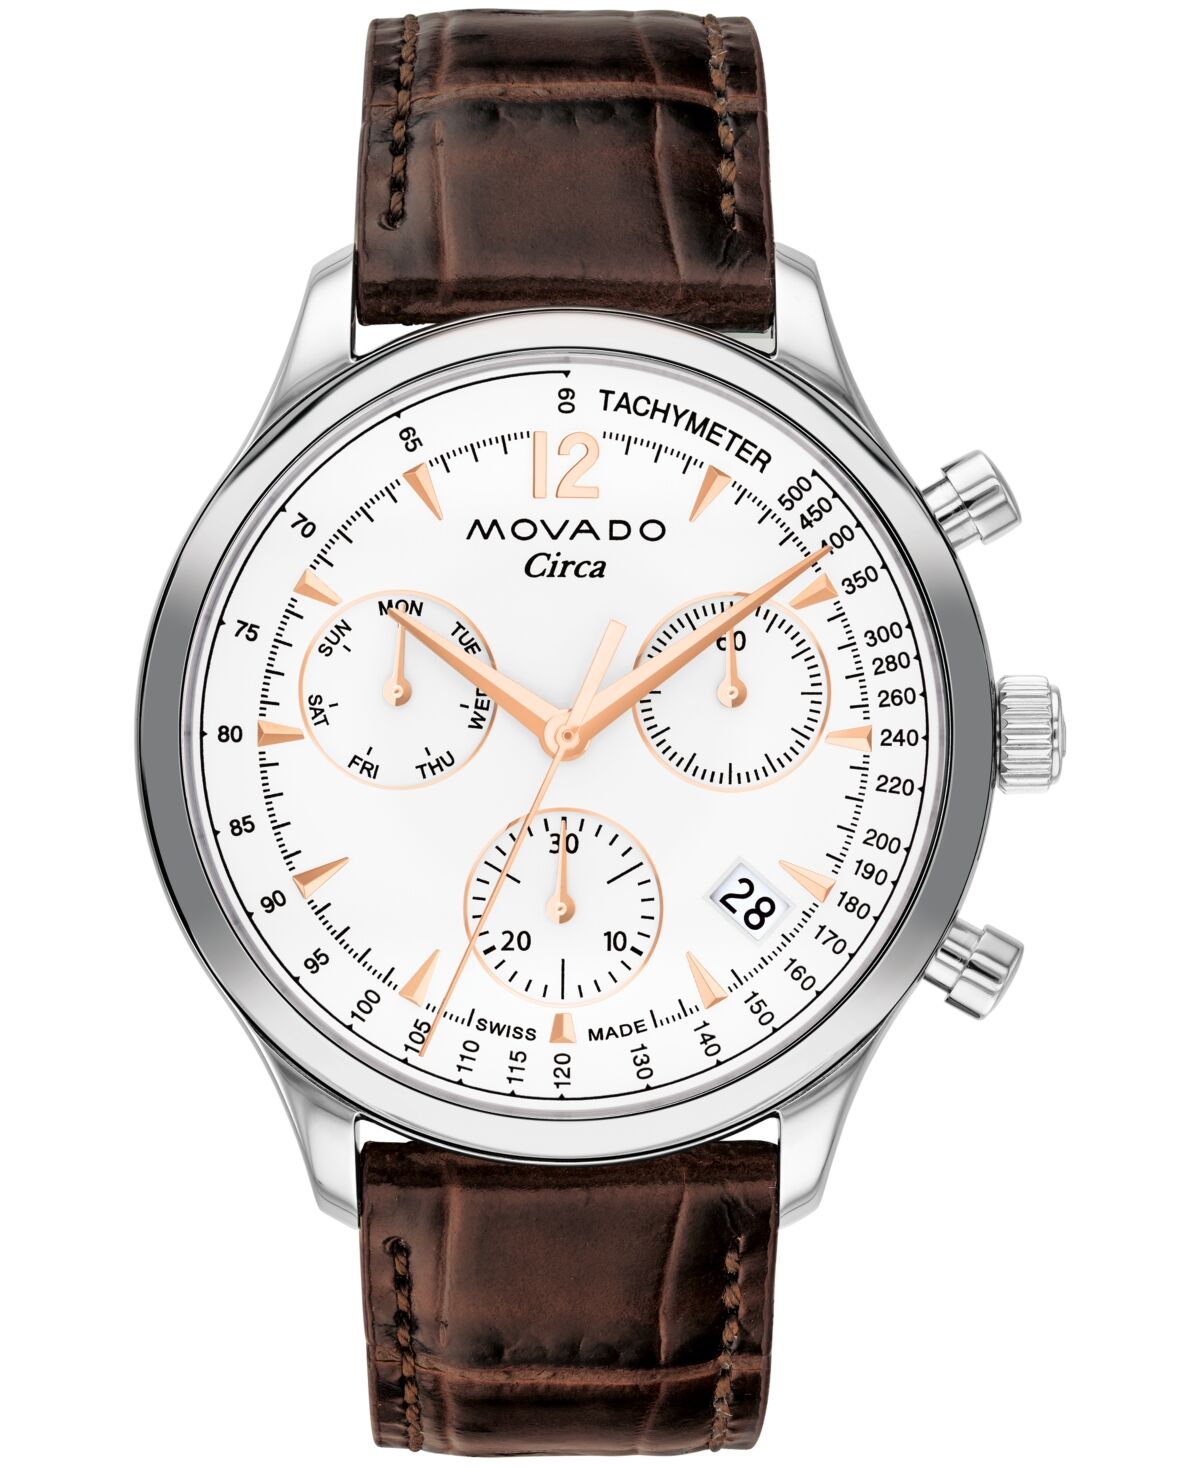 Movado Men's Heritage Brown Genuine Leather Strap Watch, 43mm - Silver